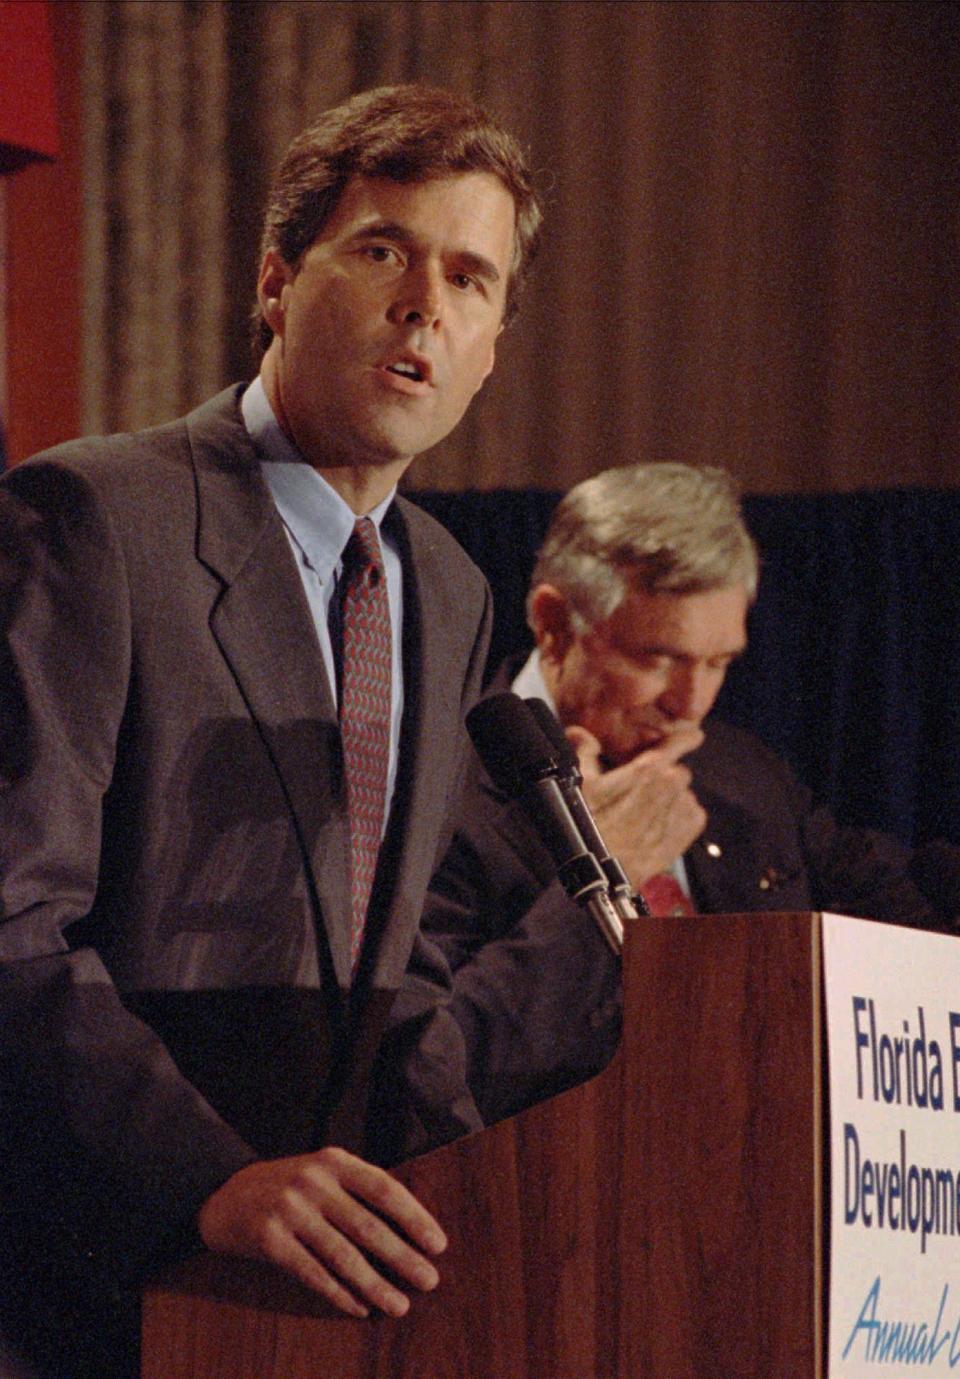 Florida gubernatorial candidate Jeb Bush answers questions as former governor Lawton Chiles listens during a debate in Miami on Sept. 29, 1994.